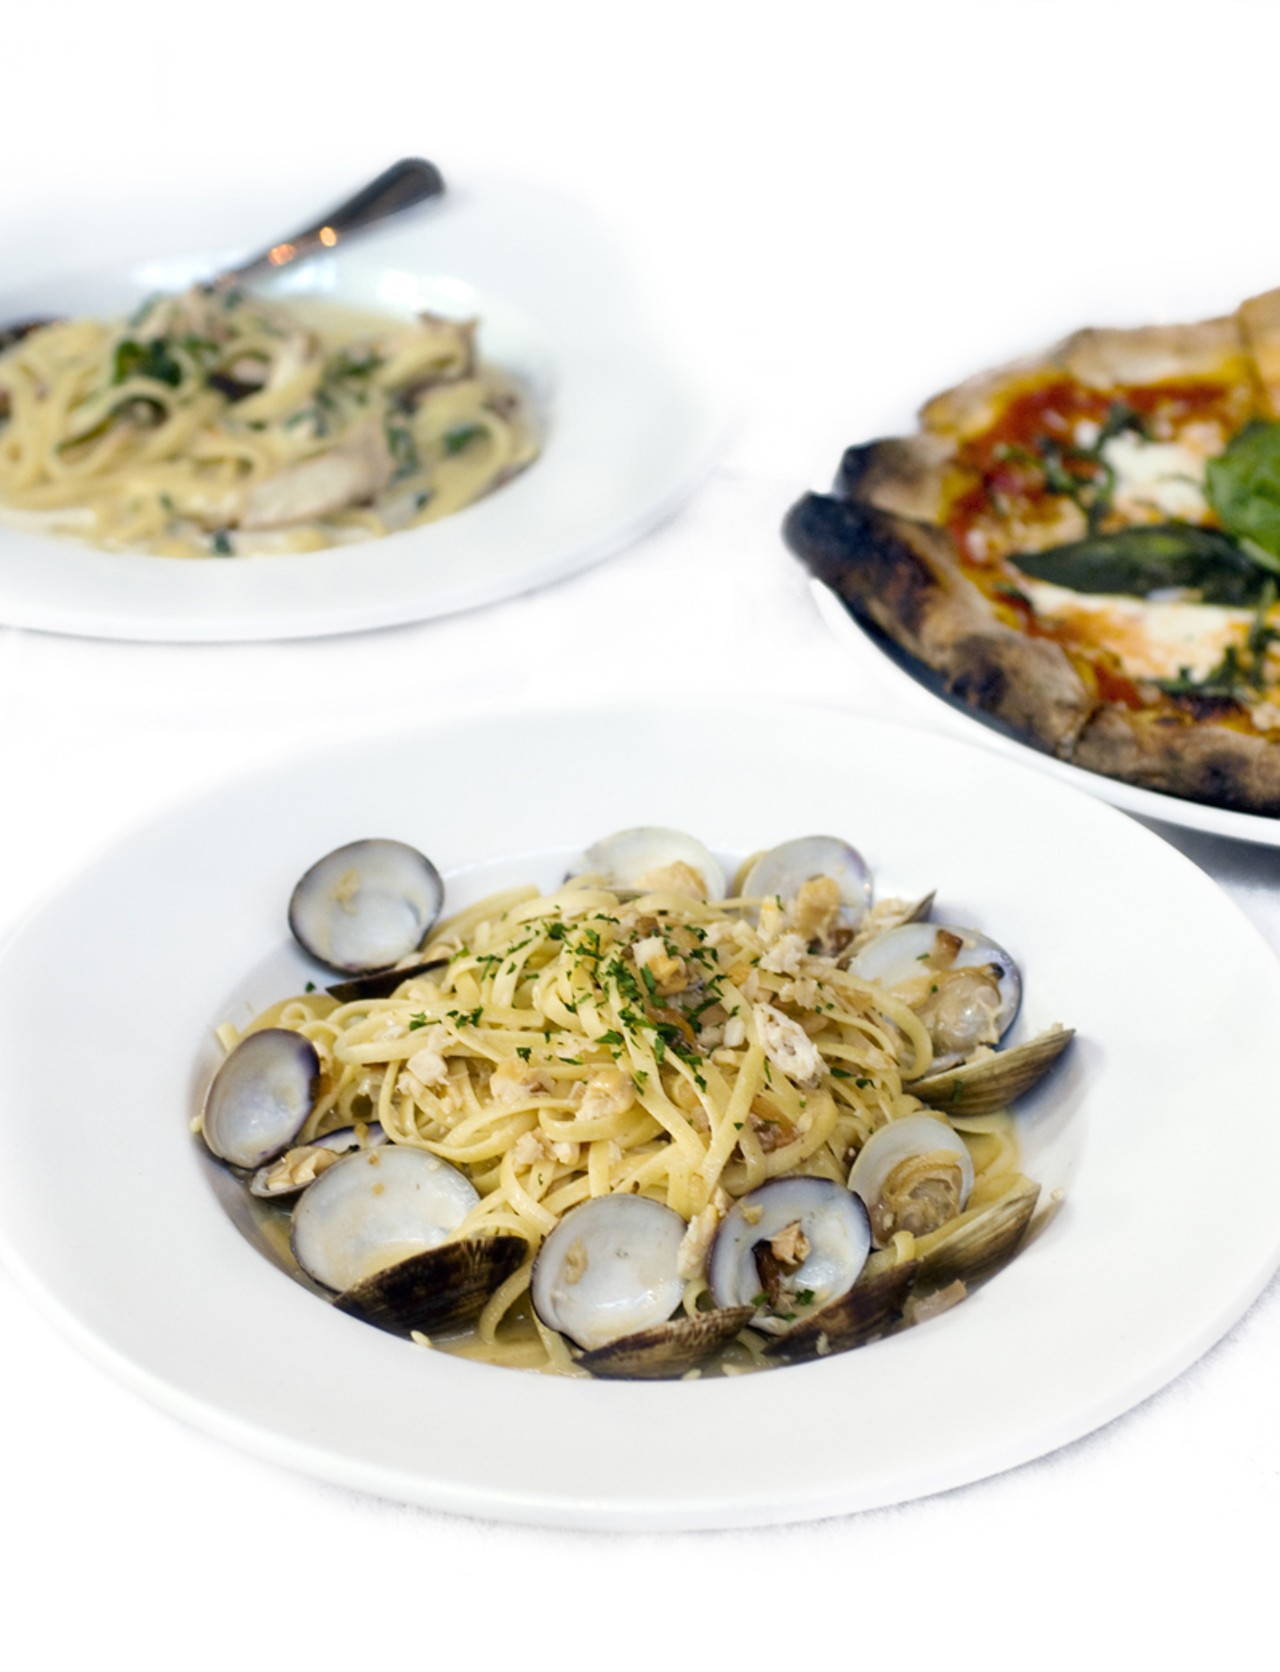 The linguini with white clam sauce is shown here with the fettuccine Romano and Margherita Pizza. The fettuccini is made with grilled chicken, prosciutto, spinach and cream sauce. The pizza is Racanelli&rsquo;s tribute to the original Italian pizza, made with Roma tomatoes, fresh mozzarella, fresh basil and Parmesan cheese.